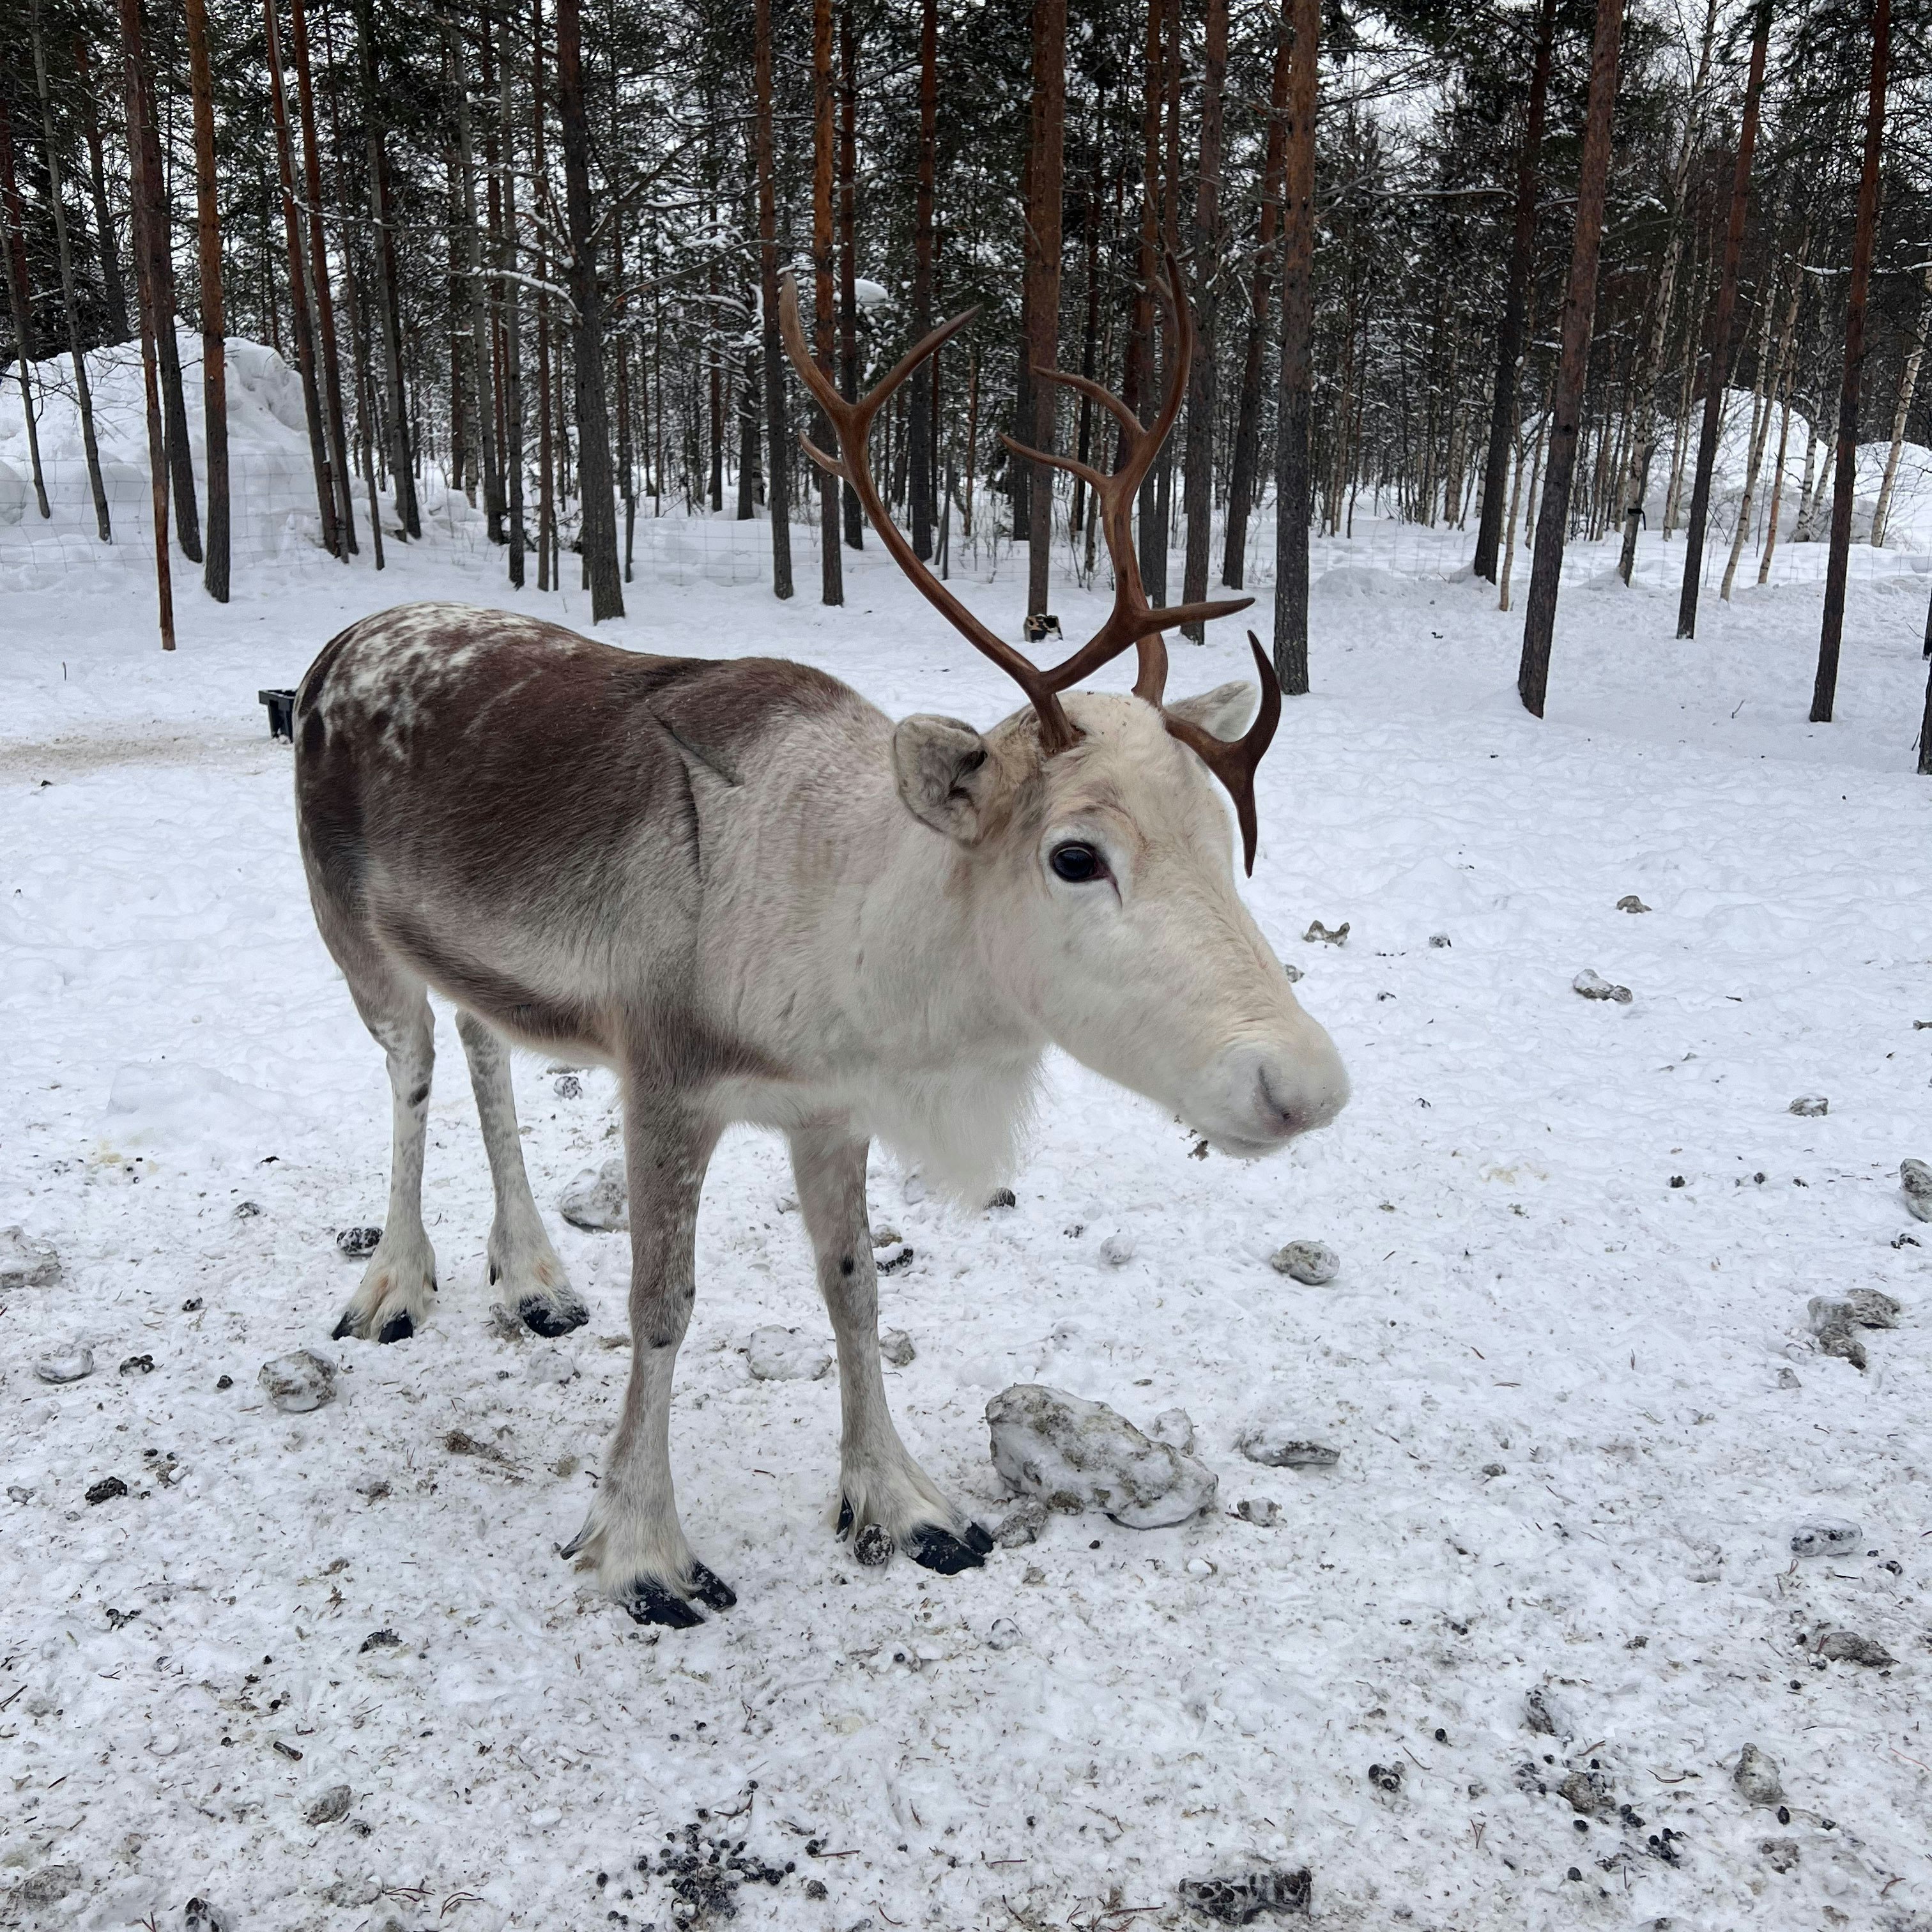 Arctic Snow Hotel reindeer at Rovaniemi's Arctic SnowHotel is in Lapland, Finland. Deepa Lakshmin/Lonely Planet.